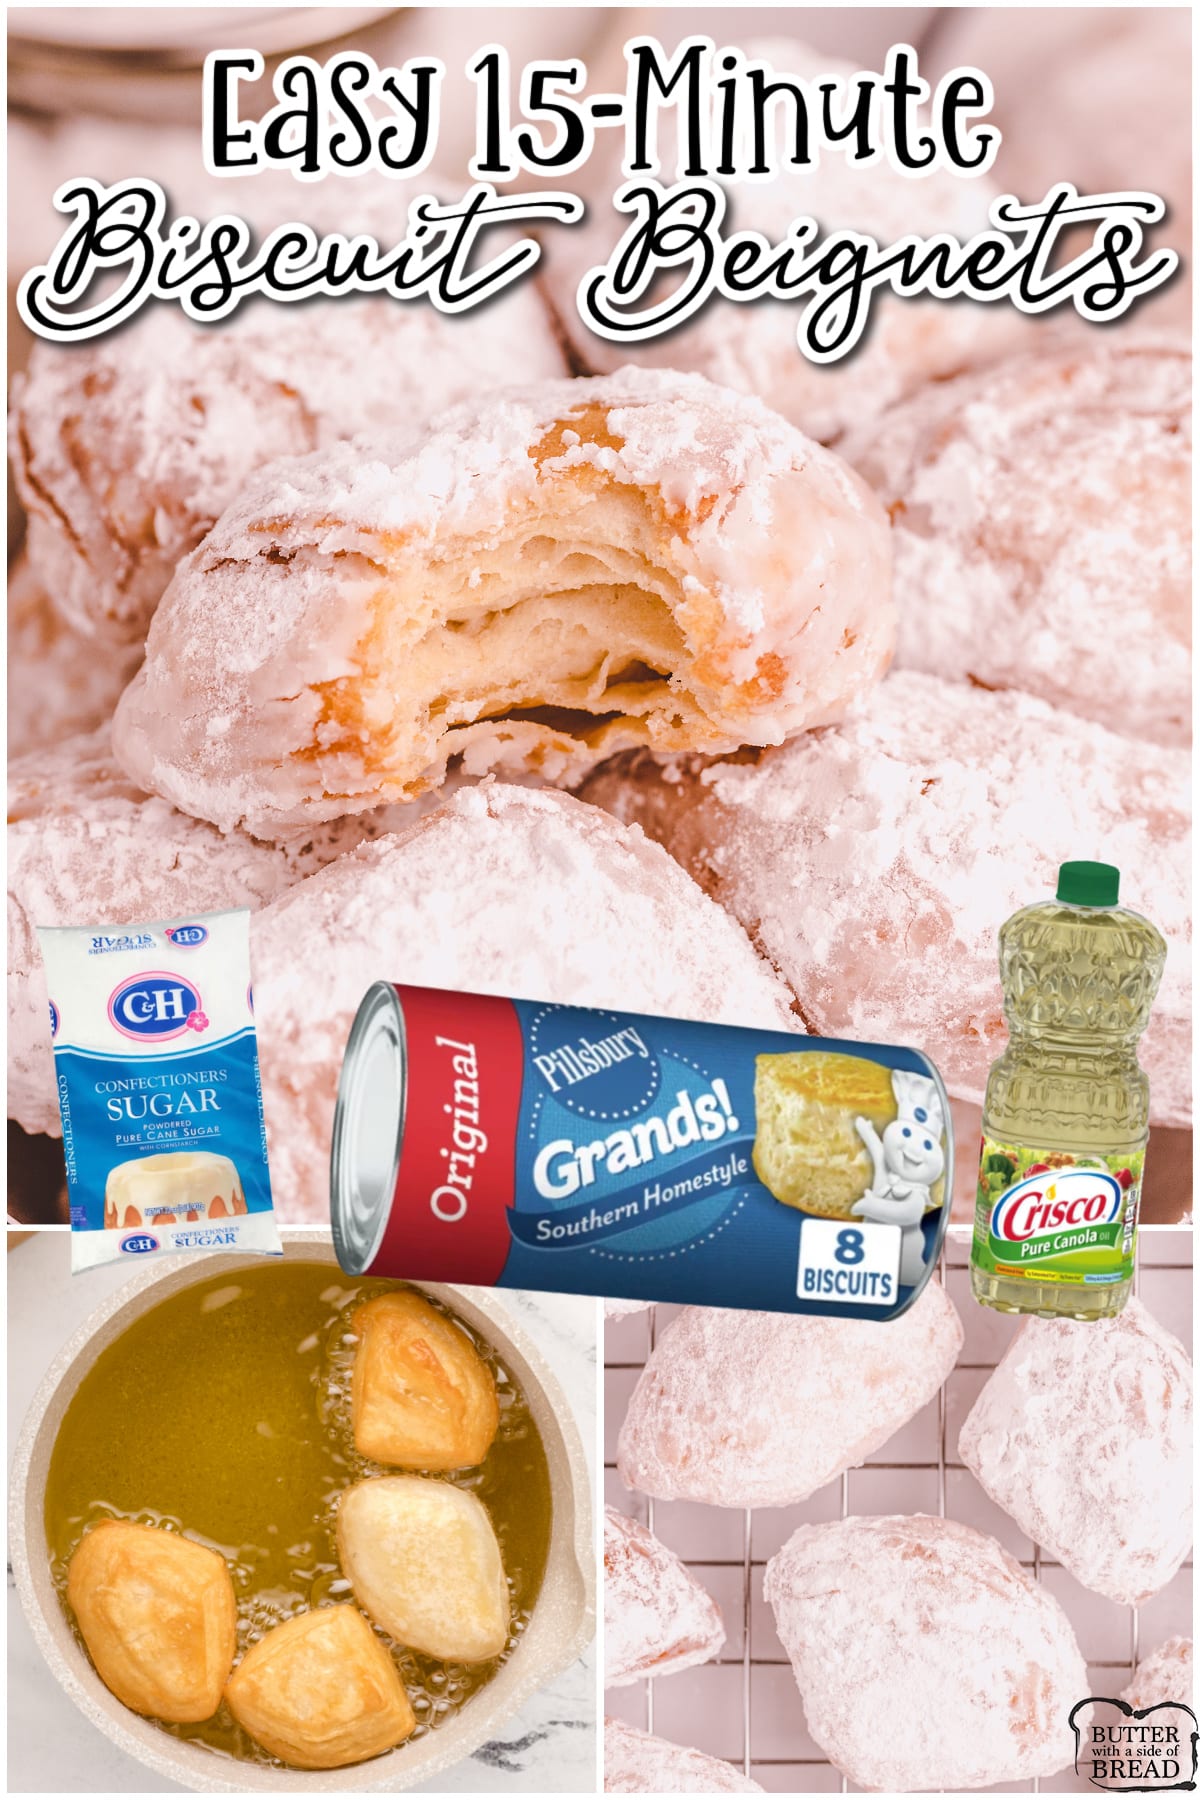 Easy Biscuit Beignets are simply made with just a few ingredients in minutes! Tender, sweet beignets with biscuits are fried, covered in powdered sugar & taste incredible!